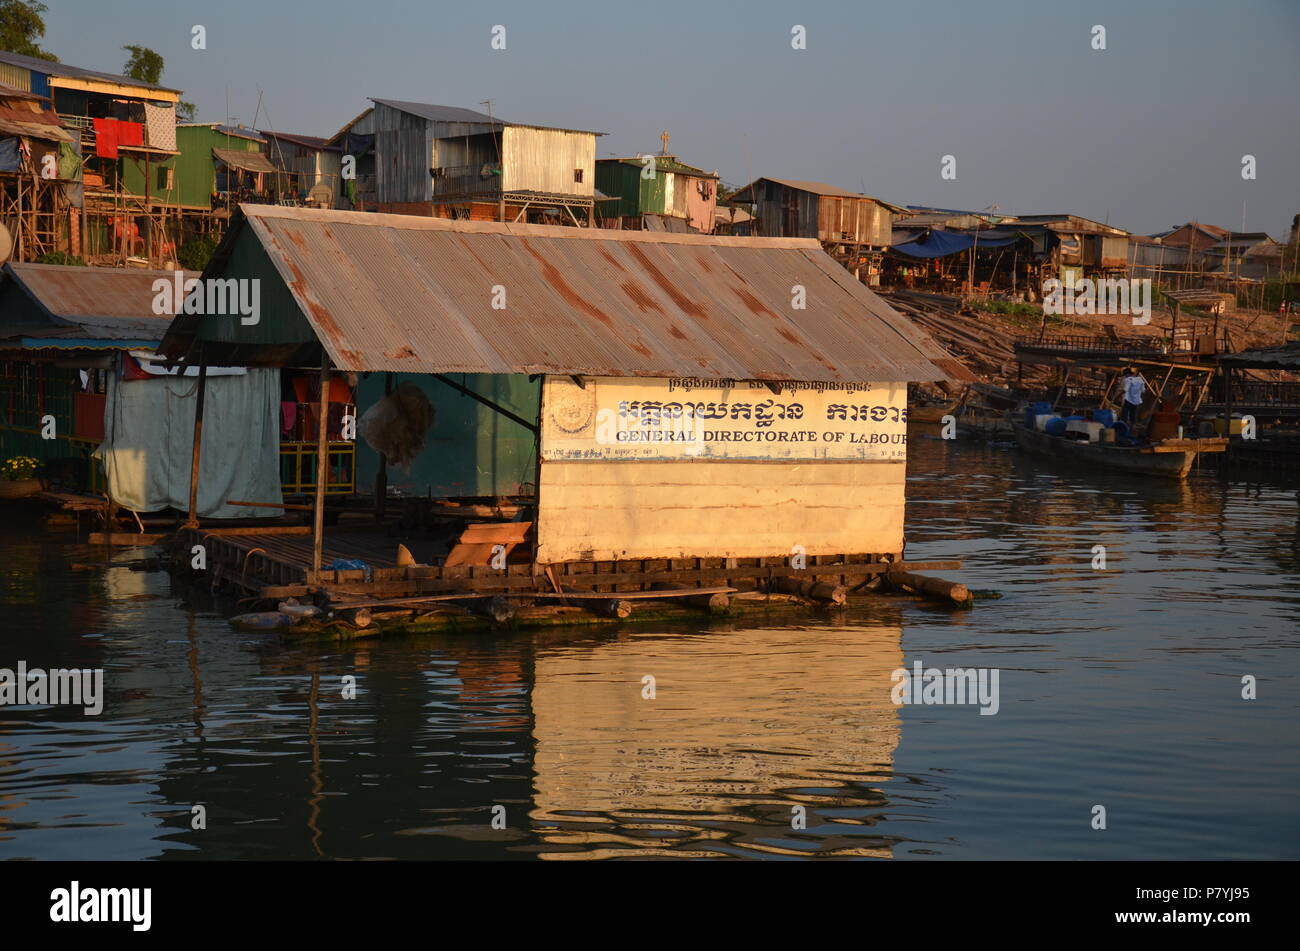 Labour directorate office on water in cambodia Stock Photo